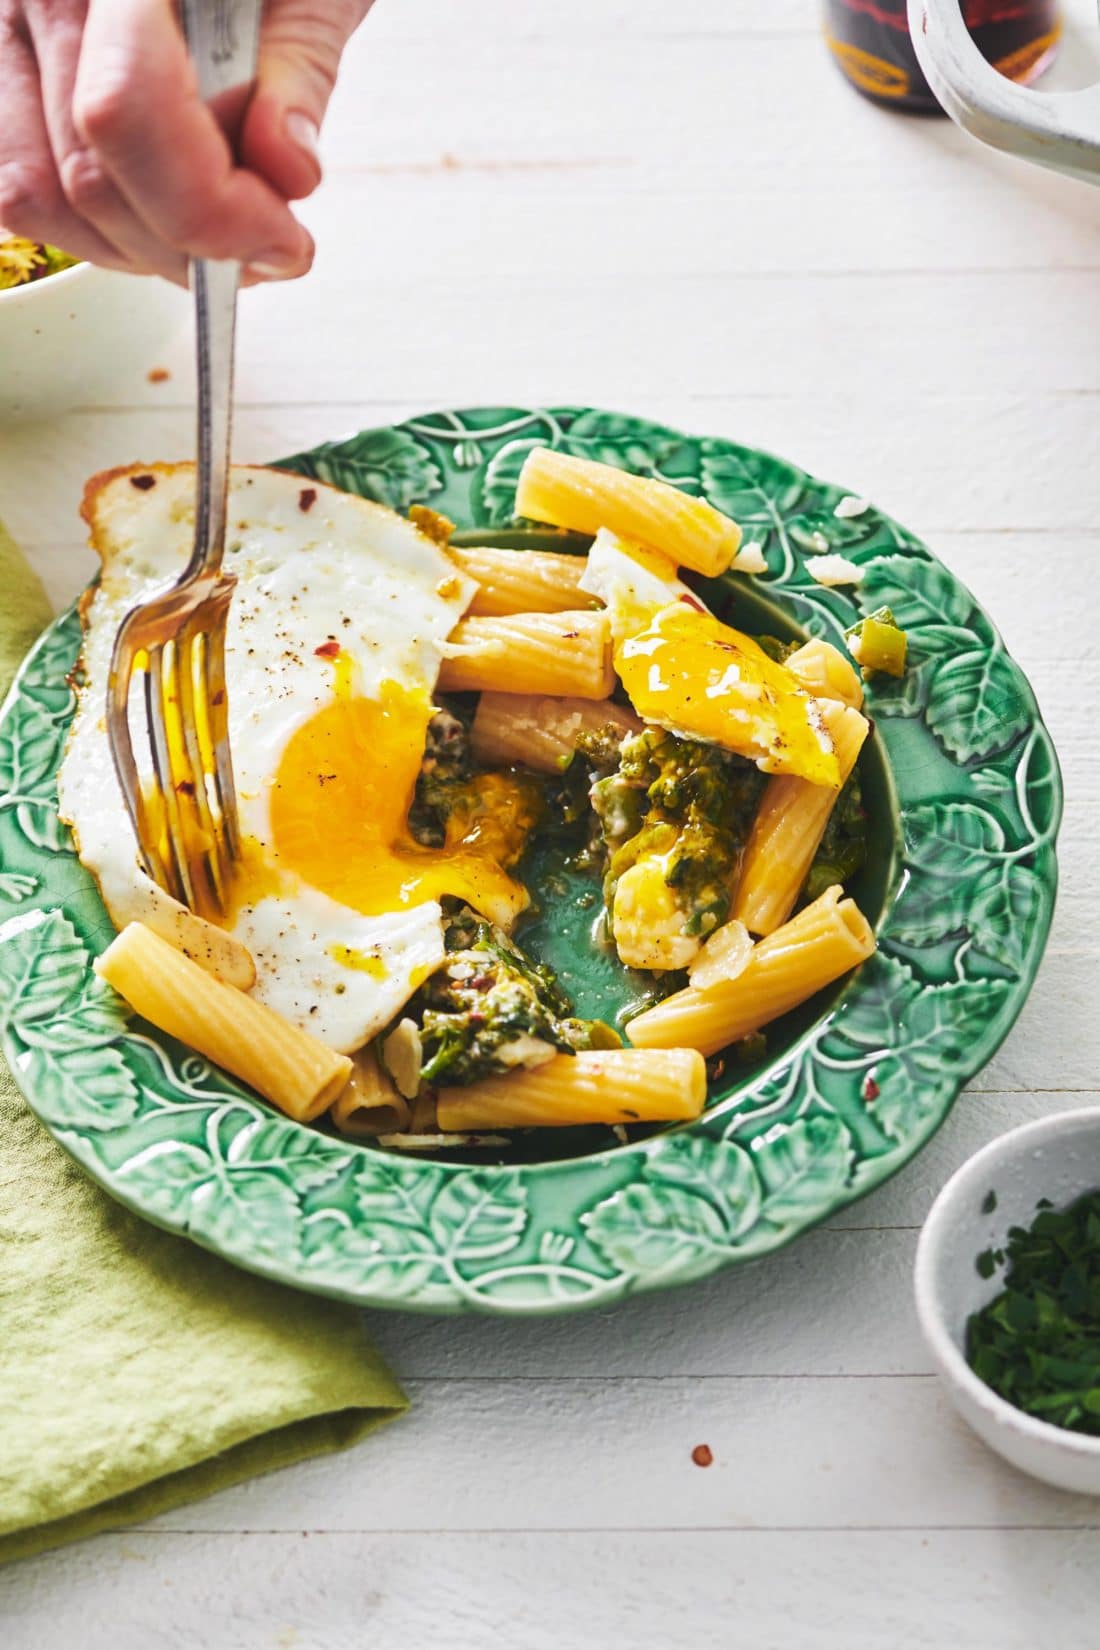 Fork in a fried egg over Pasta with Feta and Broccolini.